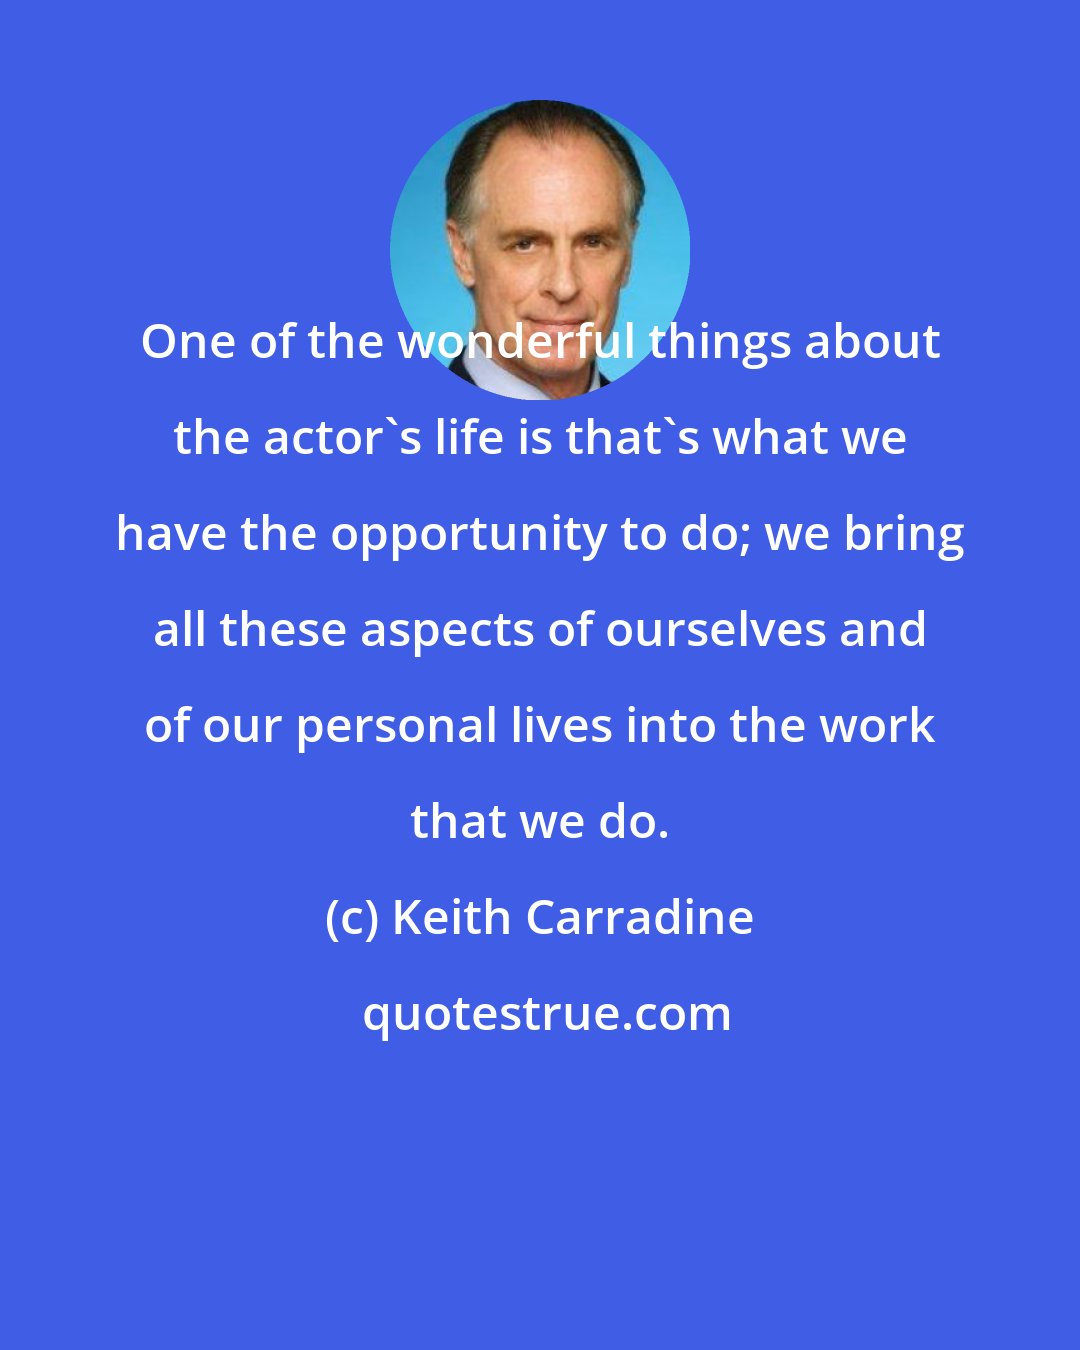 Keith Carradine: One of the wonderful things about the actor's life is that's what we have the opportunity to do; we bring all these aspects of ourselves and of our personal lives into the work that we do.